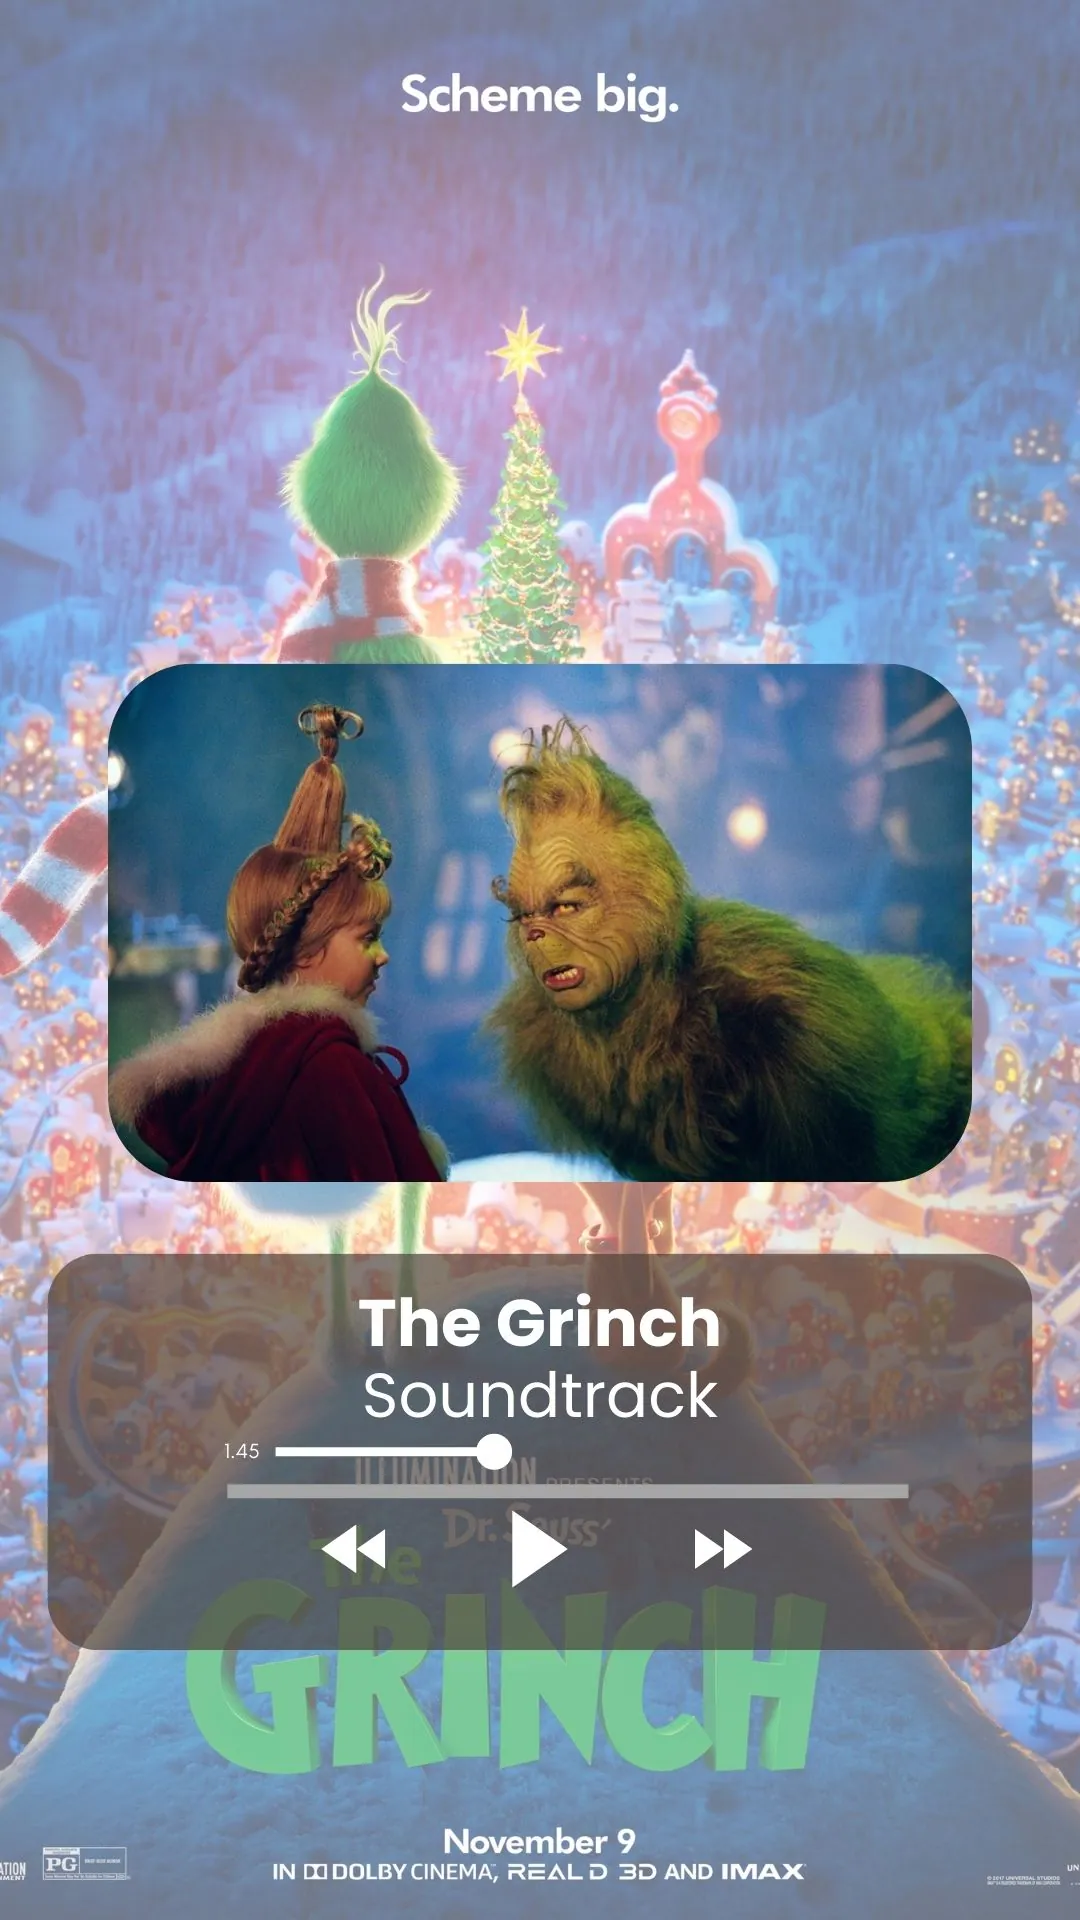 The Grinch Soundtrack